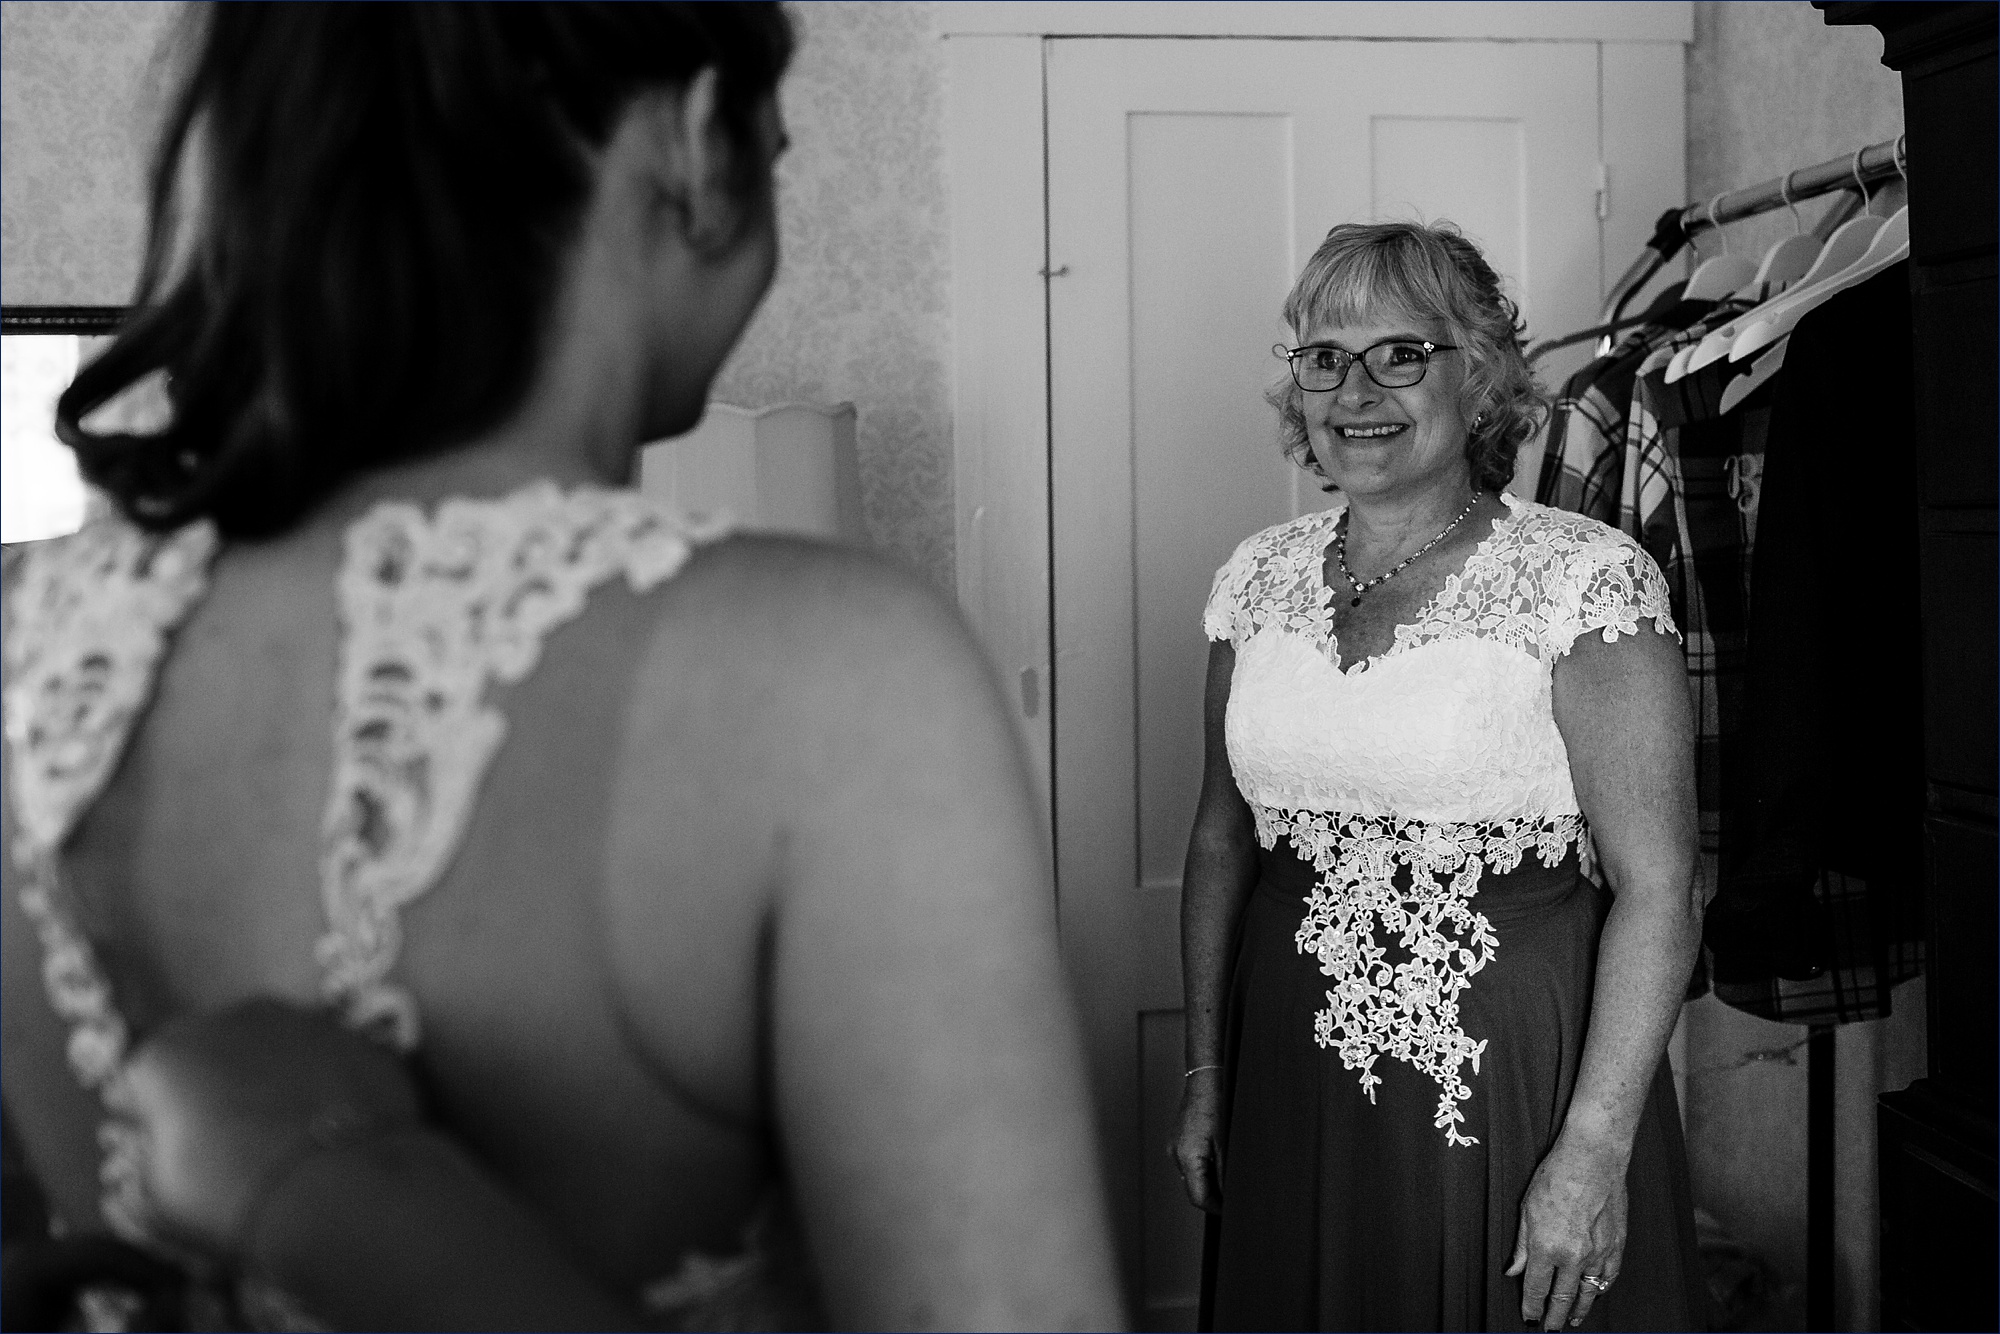 The mother of the bride watches as her daughter gets into her wedding gown with love in her eyes